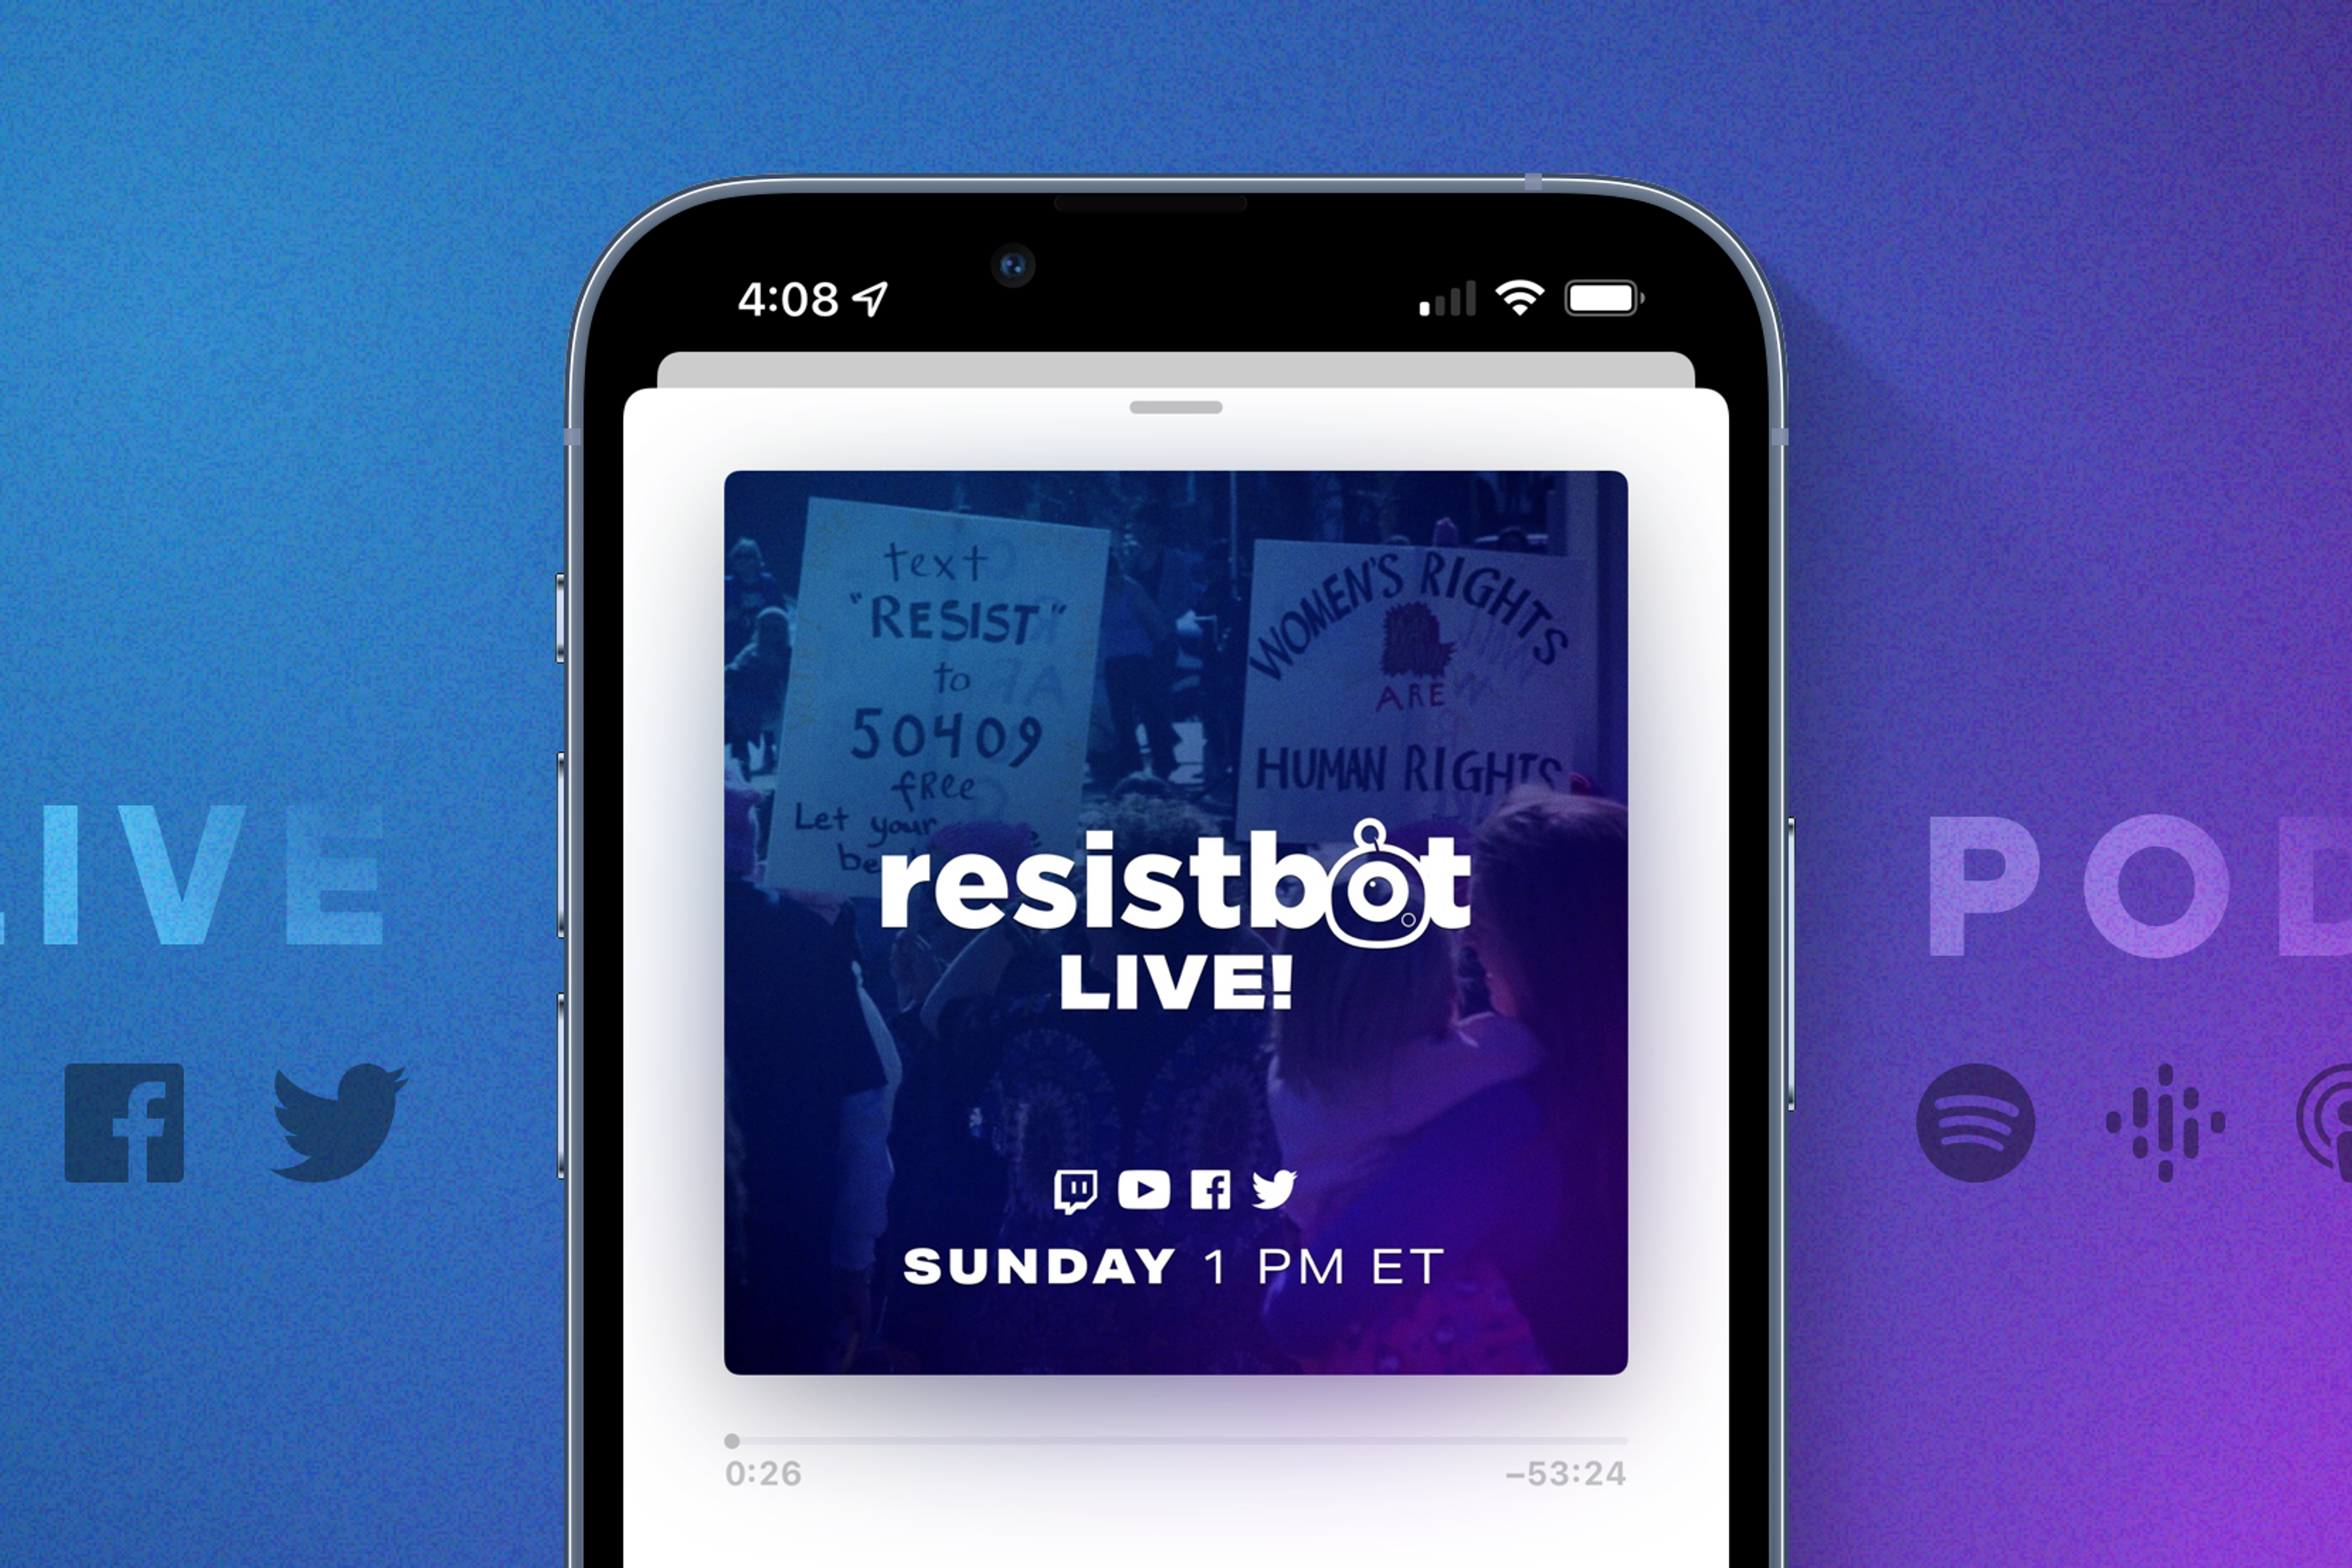 Resistbot Live airs every Sunday at 1 PM ET